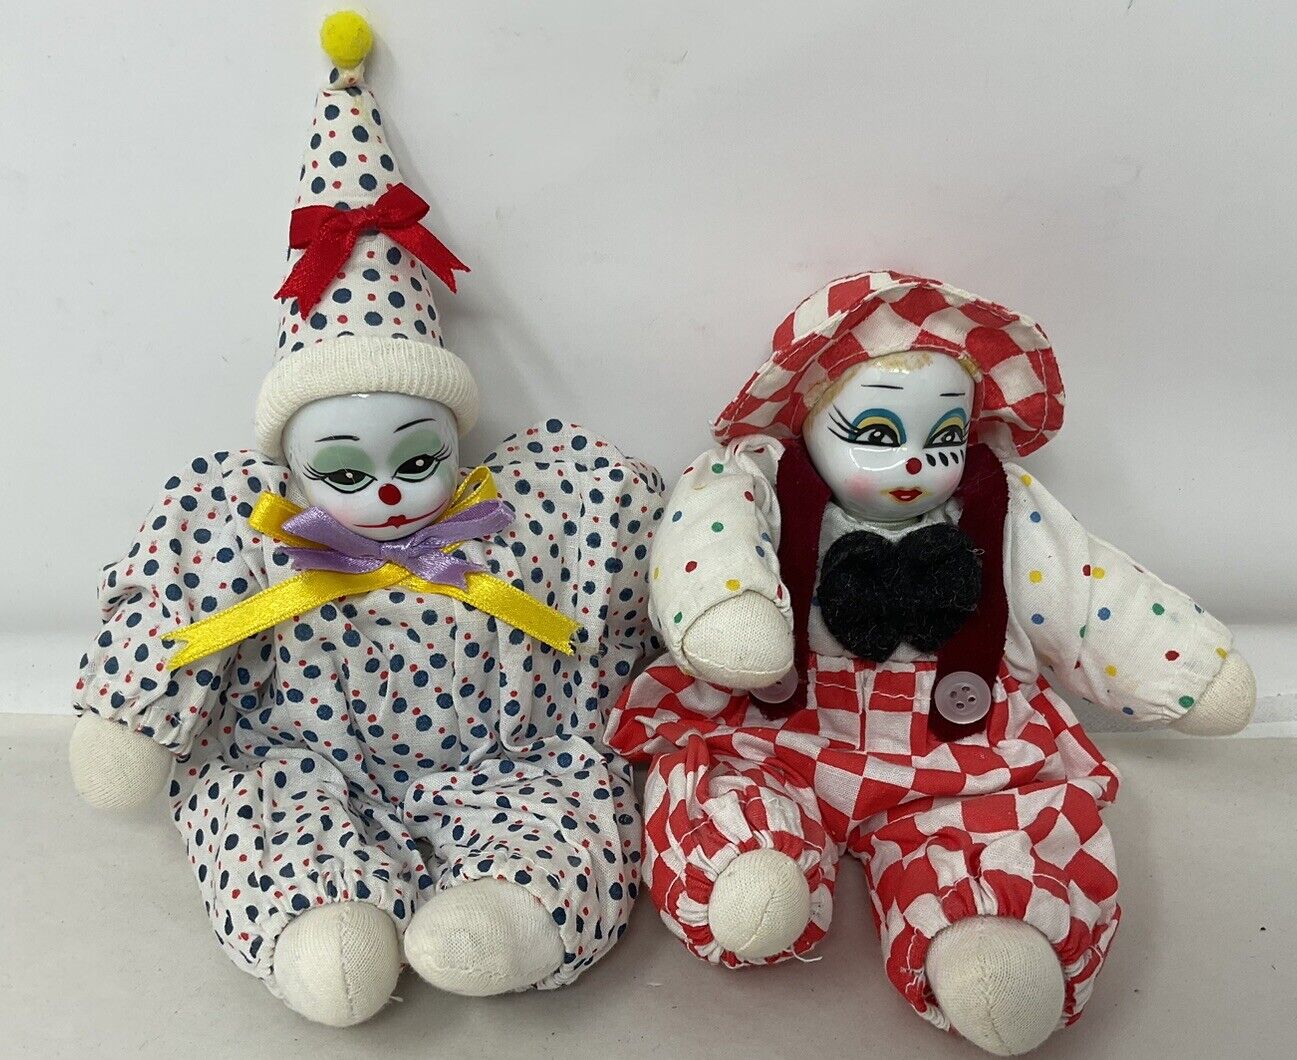 Vintage Porcelain Head Clown Doll Red Blue Polka Dots Weighted Bottom Lot Of 2